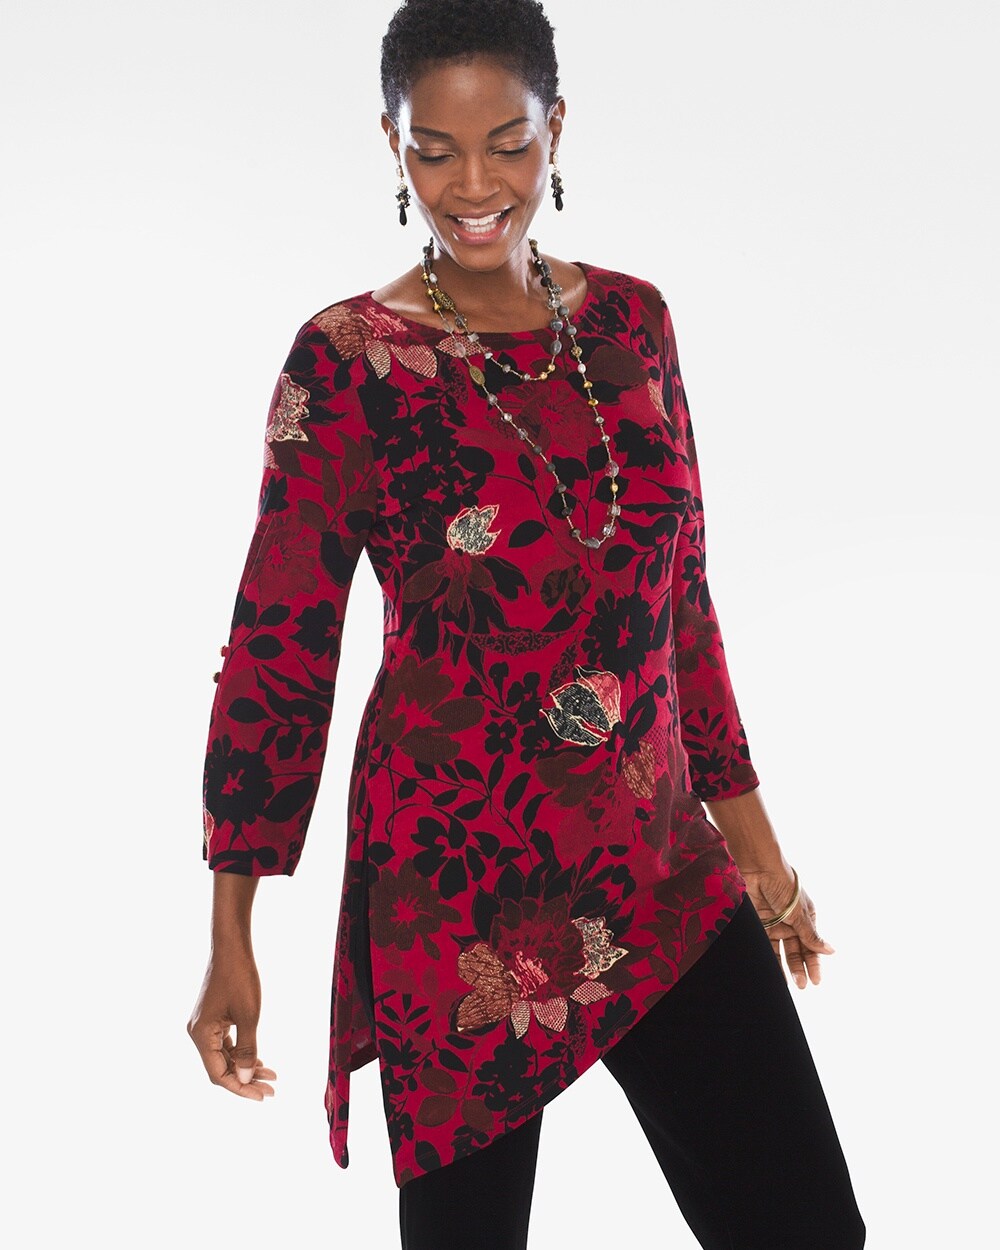 Travelers Classic Asymmetrical Floral-Print Top